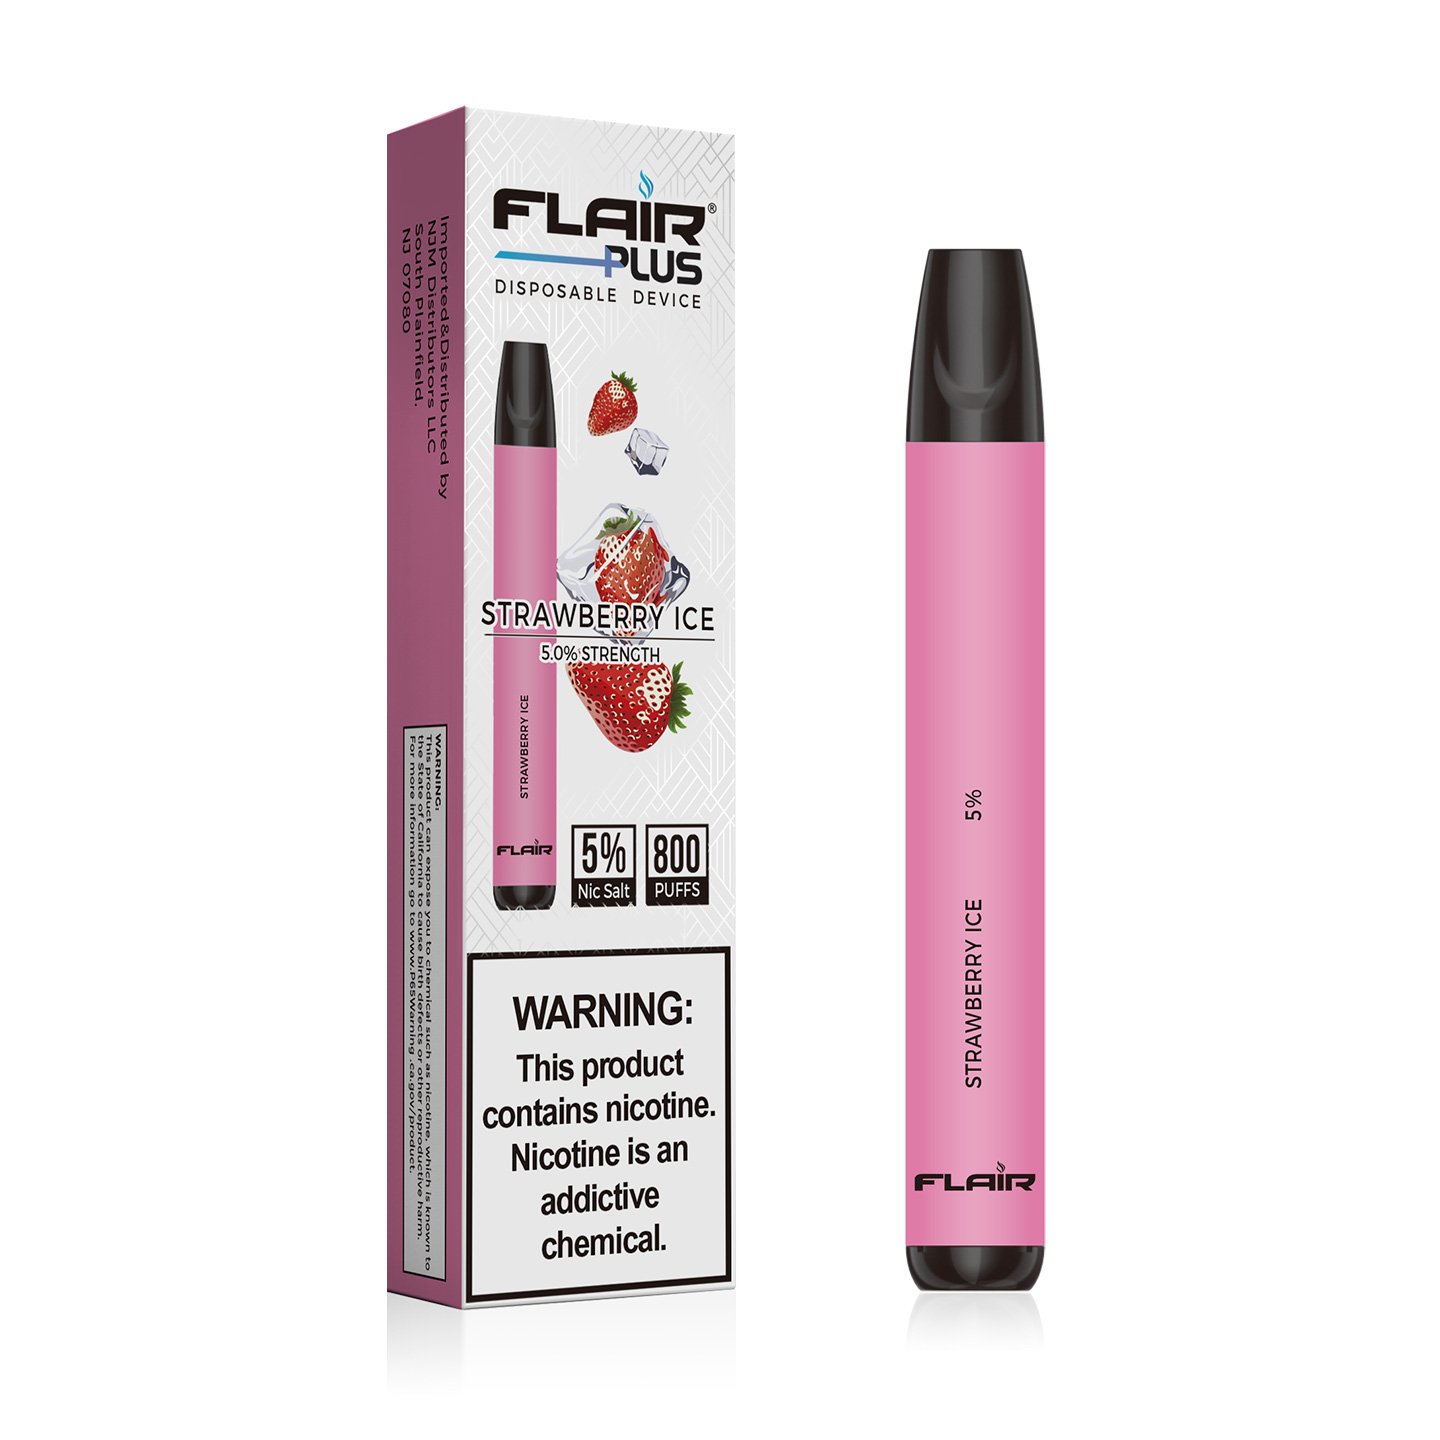 Flair Plus Disposable Devices (Strawberry ice - 800 Puffs)